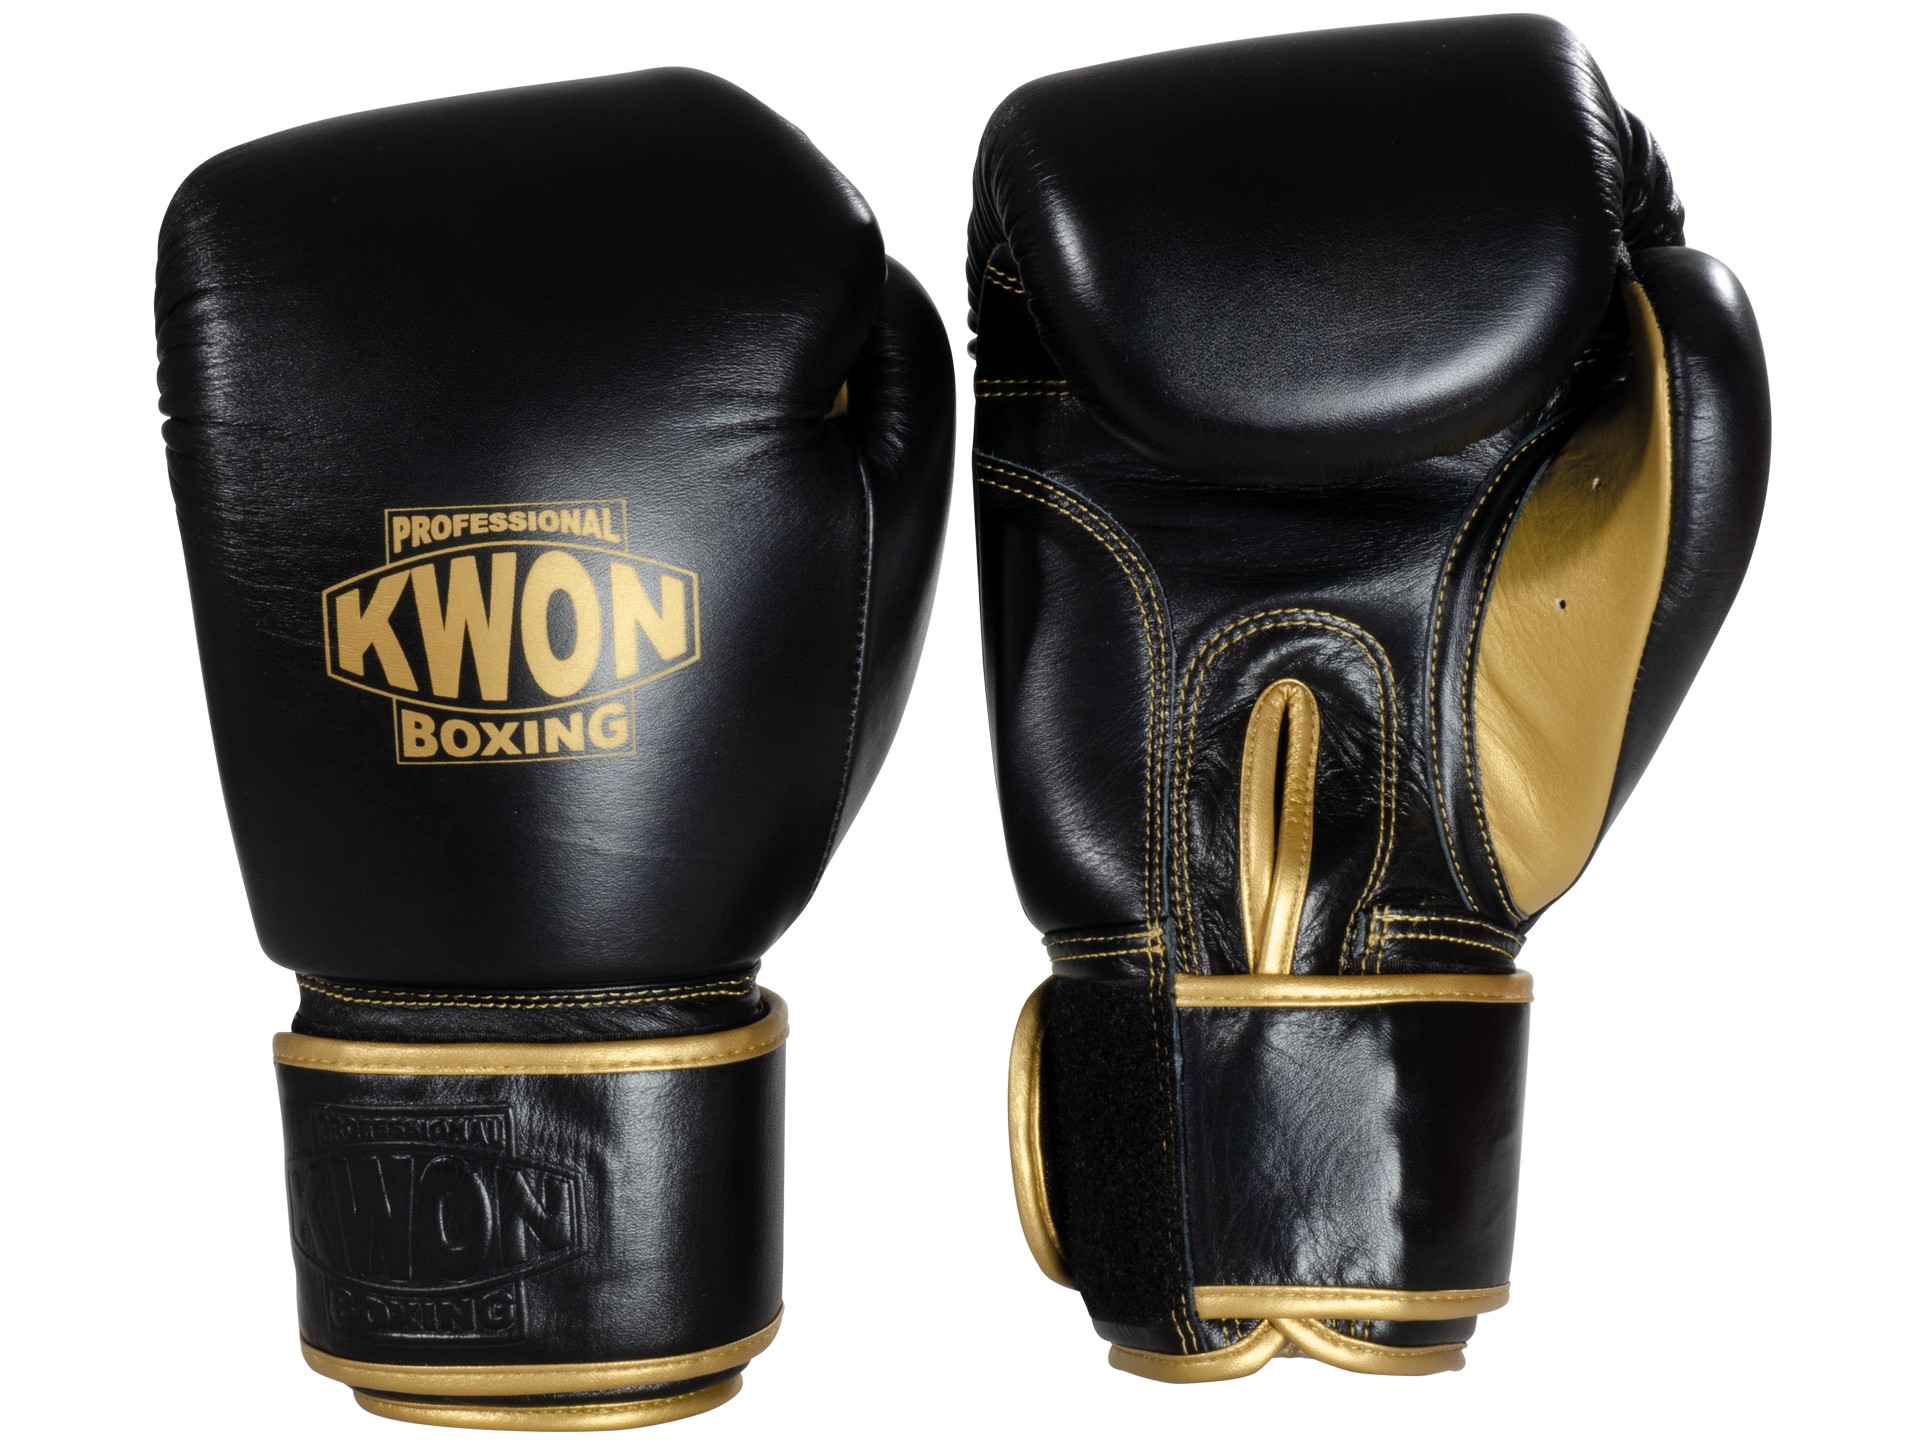 Thai kickboxing boxes | Sparring PROFESSIONAL Defensive KWON BOXING Velcro for Leather with Gloves